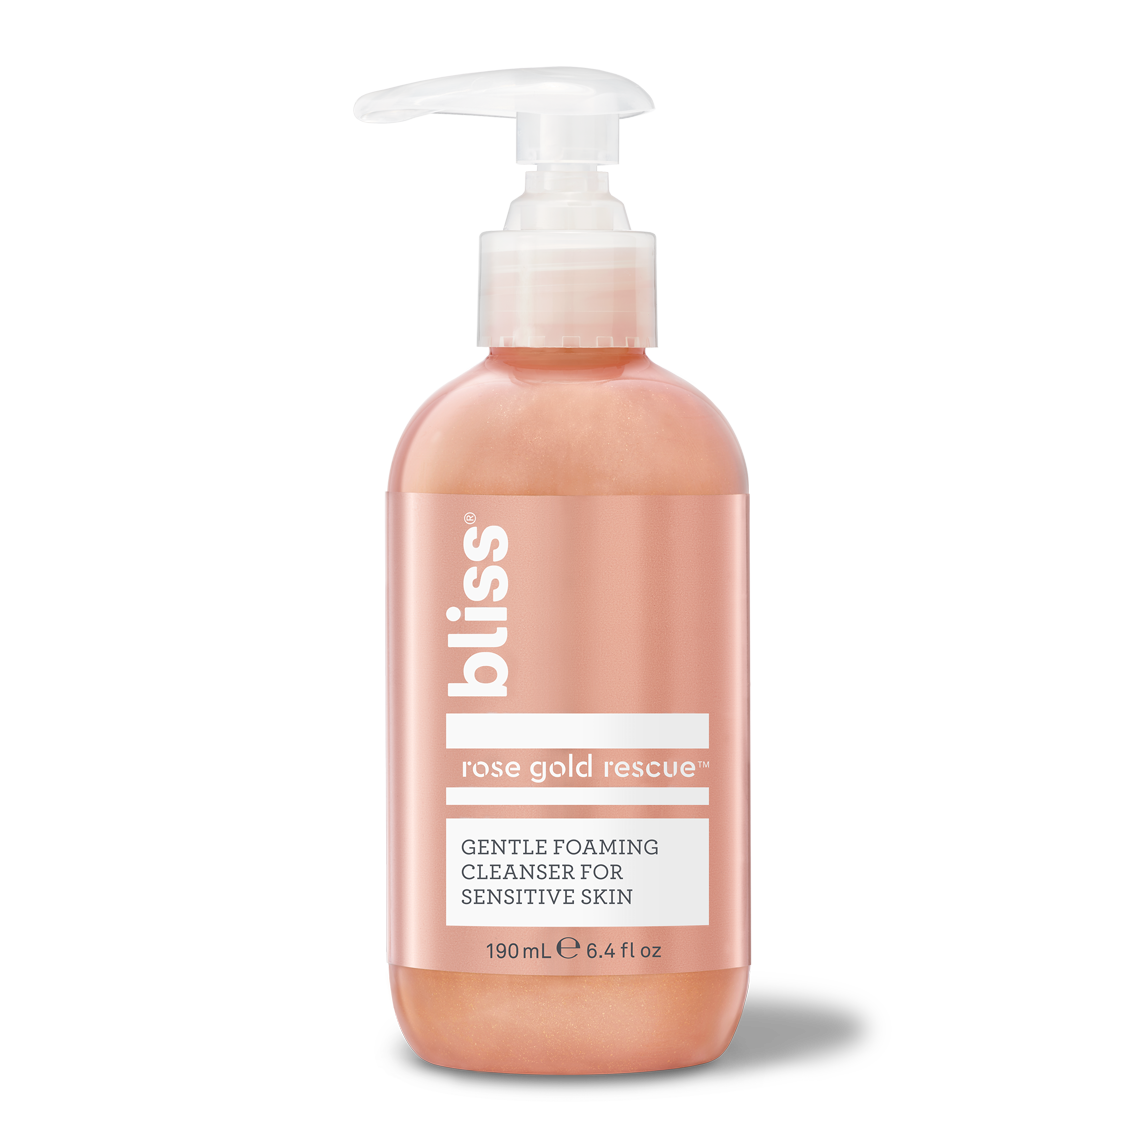 Bliss Rose Gold Rescue Cleanser